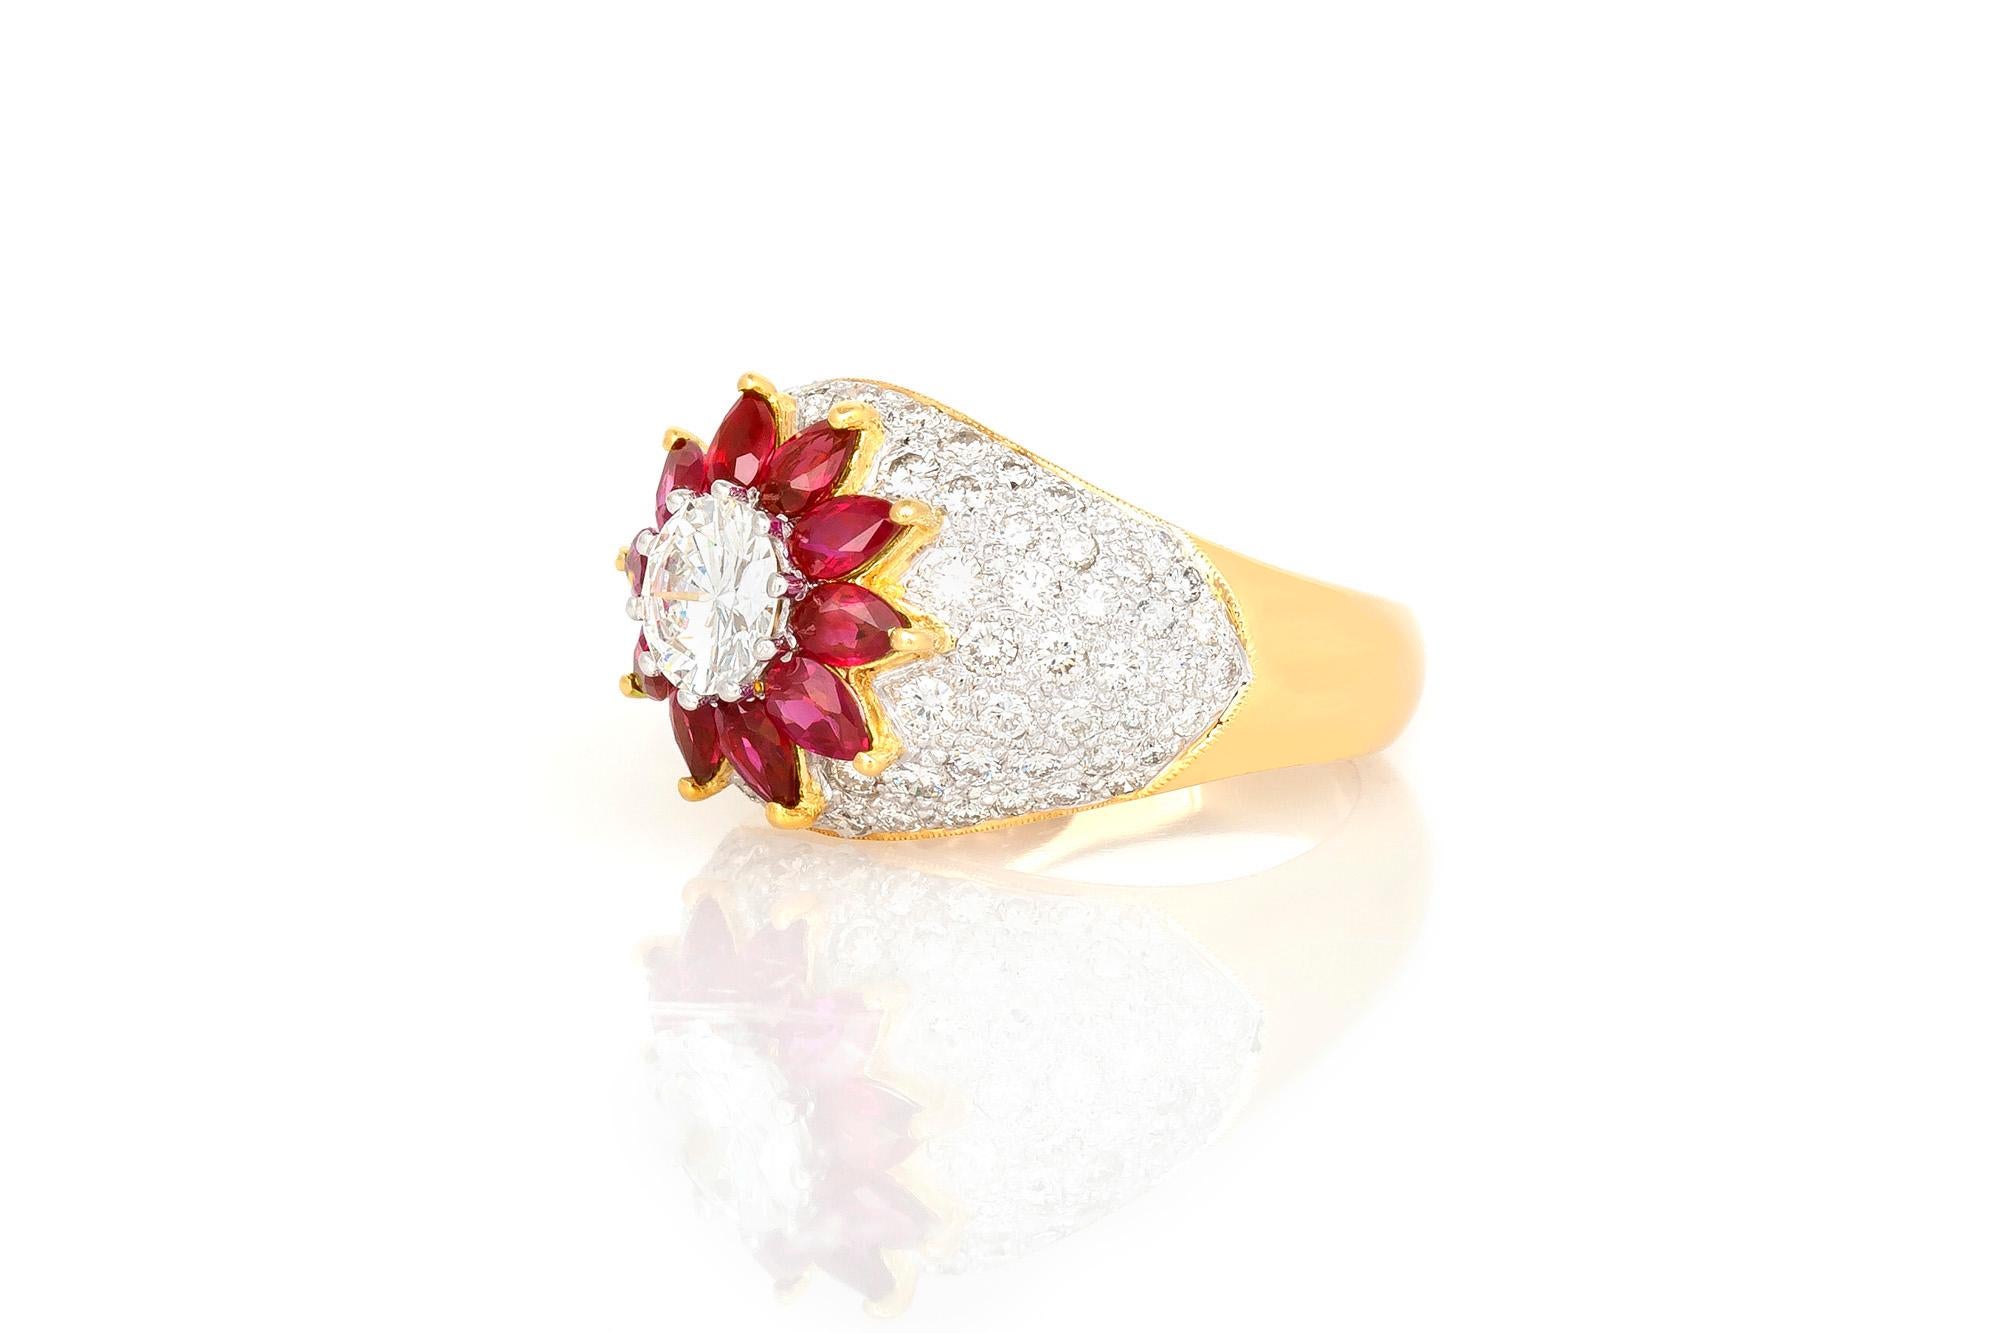 Ring finely crafted in 18K yellow gold with center diamond weighing approximately 0.80 carat.
Pair shaped Rubies weighing approximately 1.80 carat. 
The diamonds around the Ruby weigh approximately 2.00 carat.
The ring size is 6.5 US and 53 EU